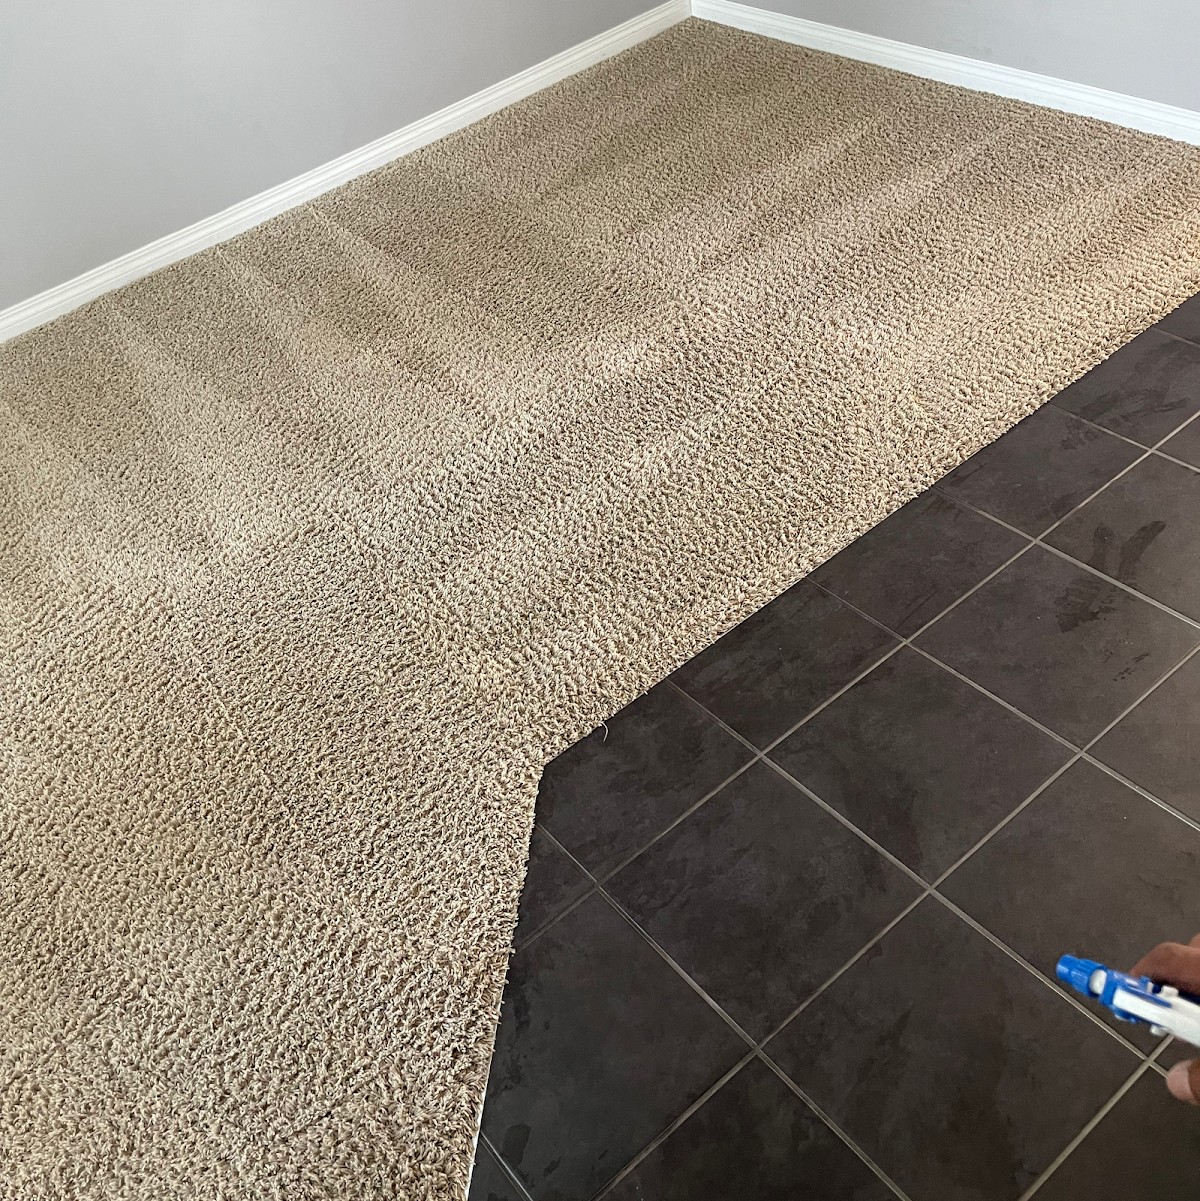 Quality Carpet and Tile Cleaning reviews